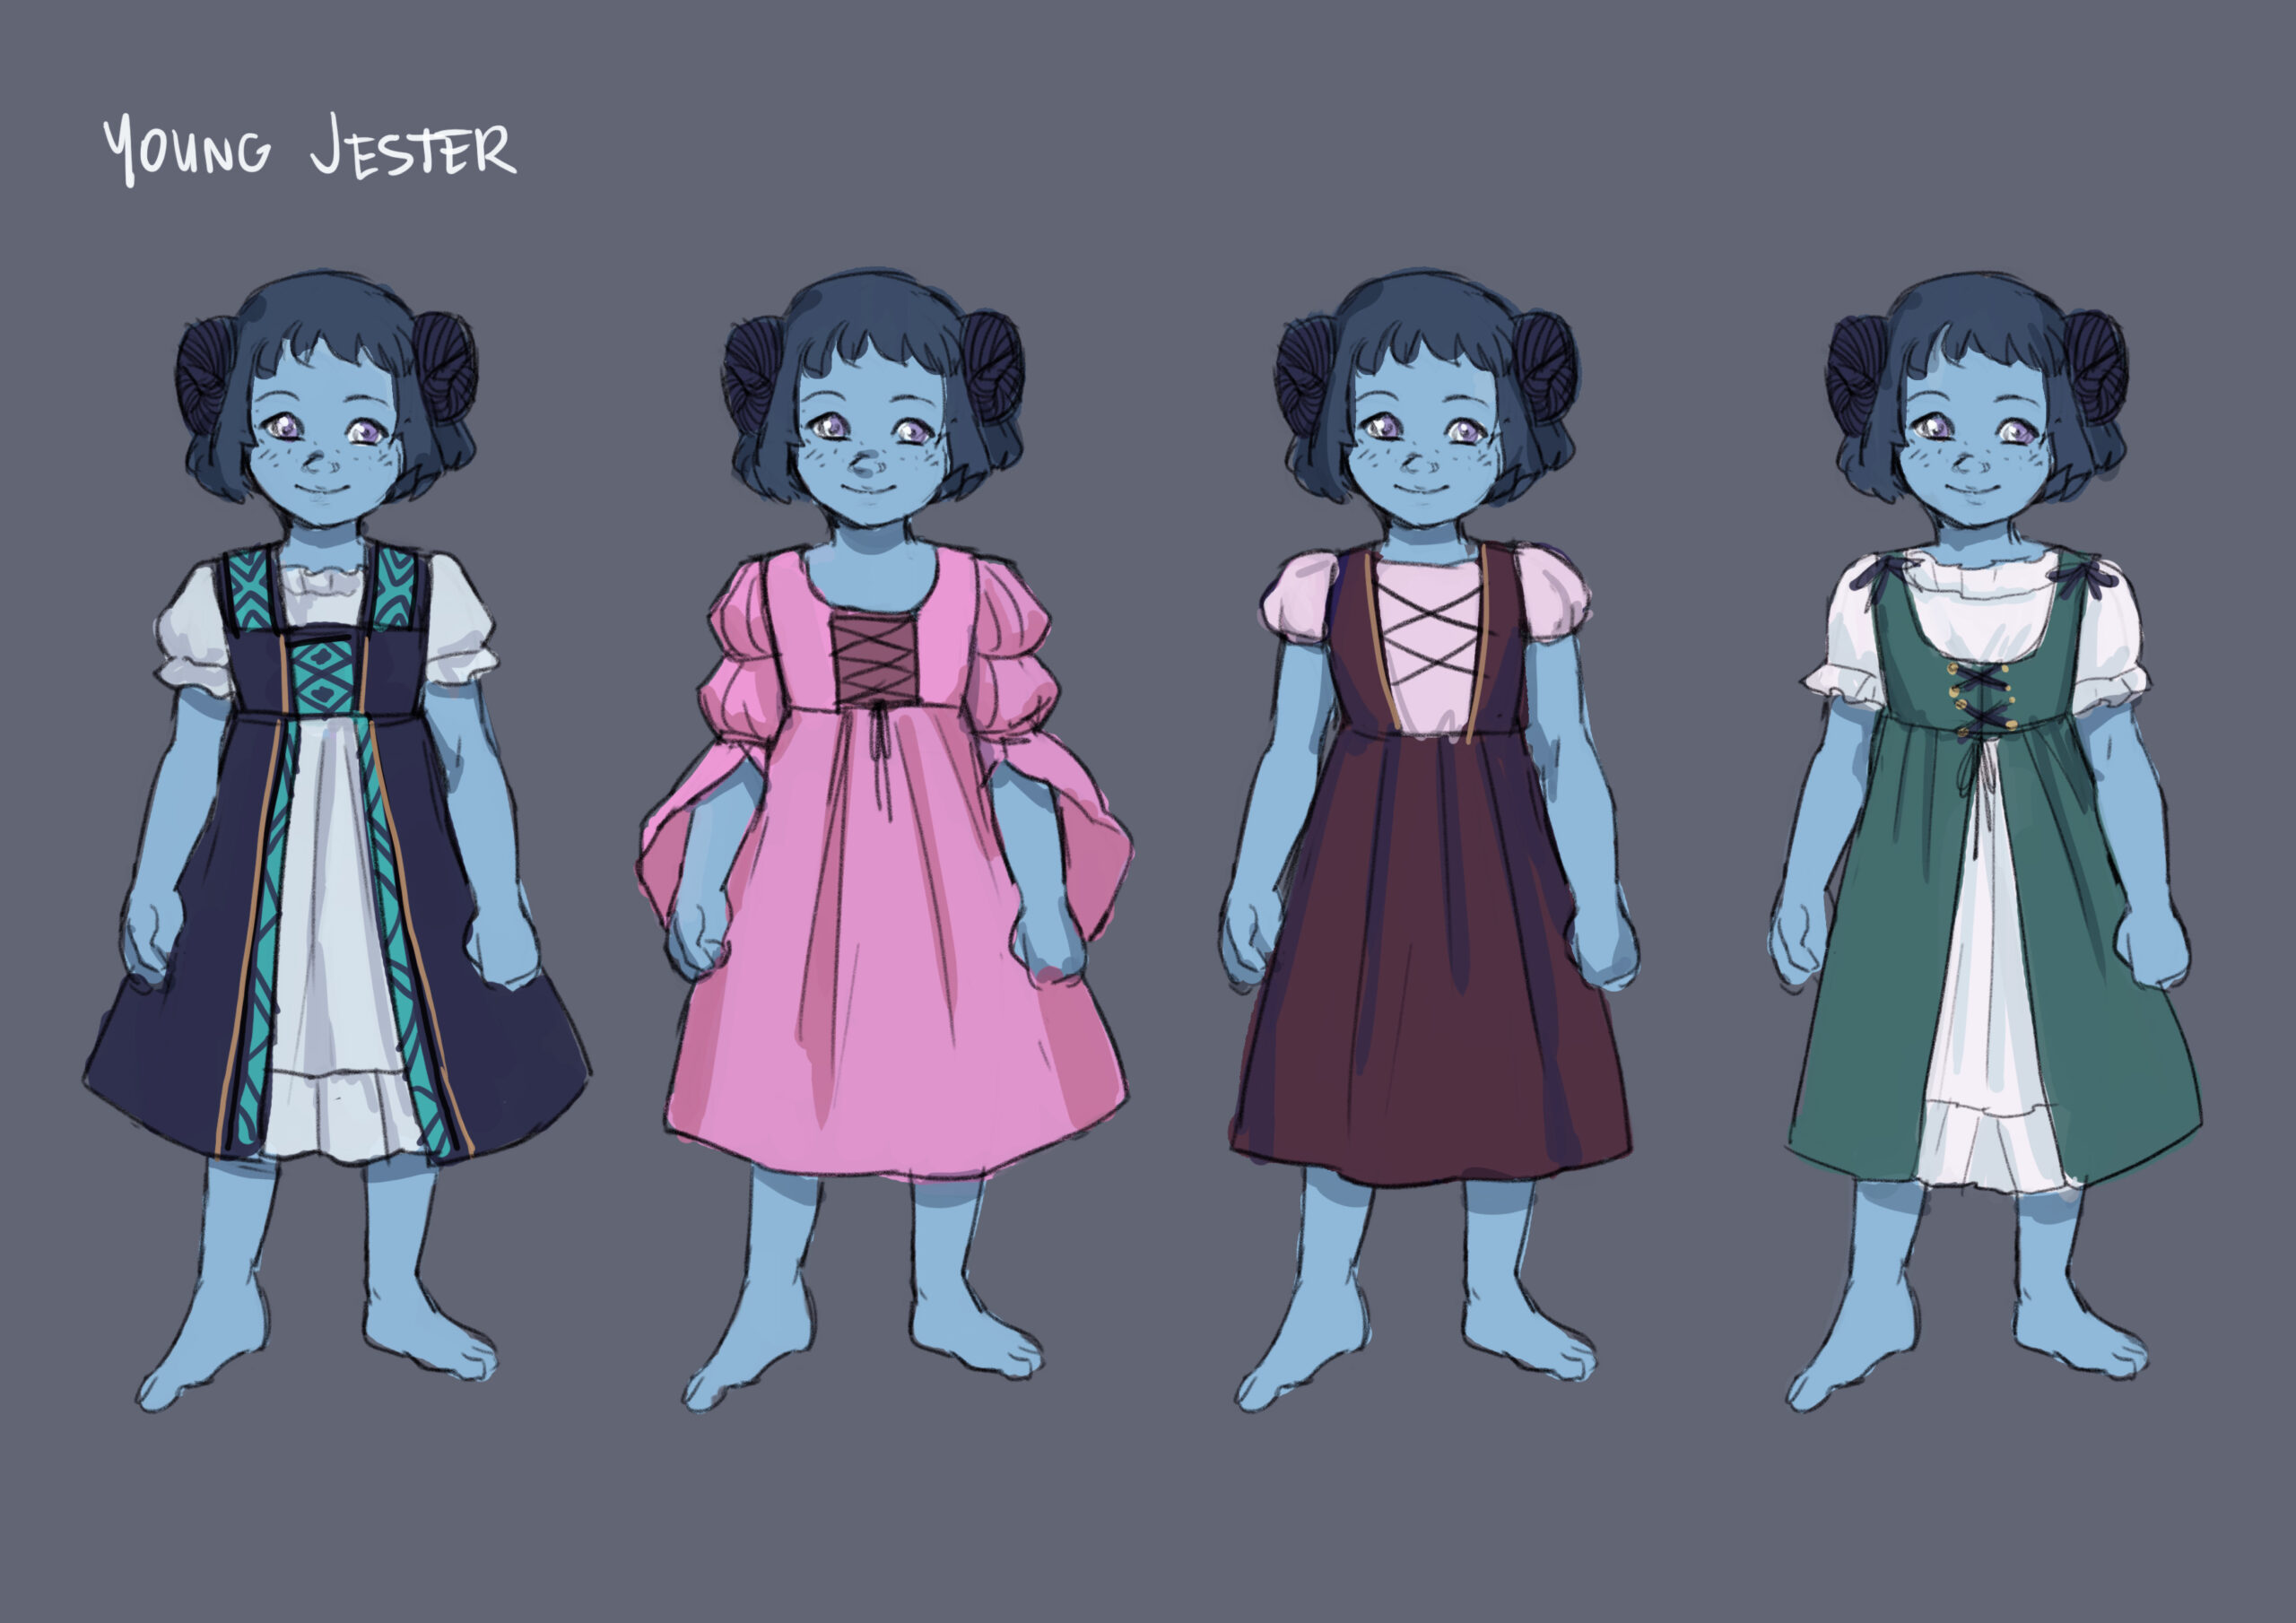 Young Jester concepts